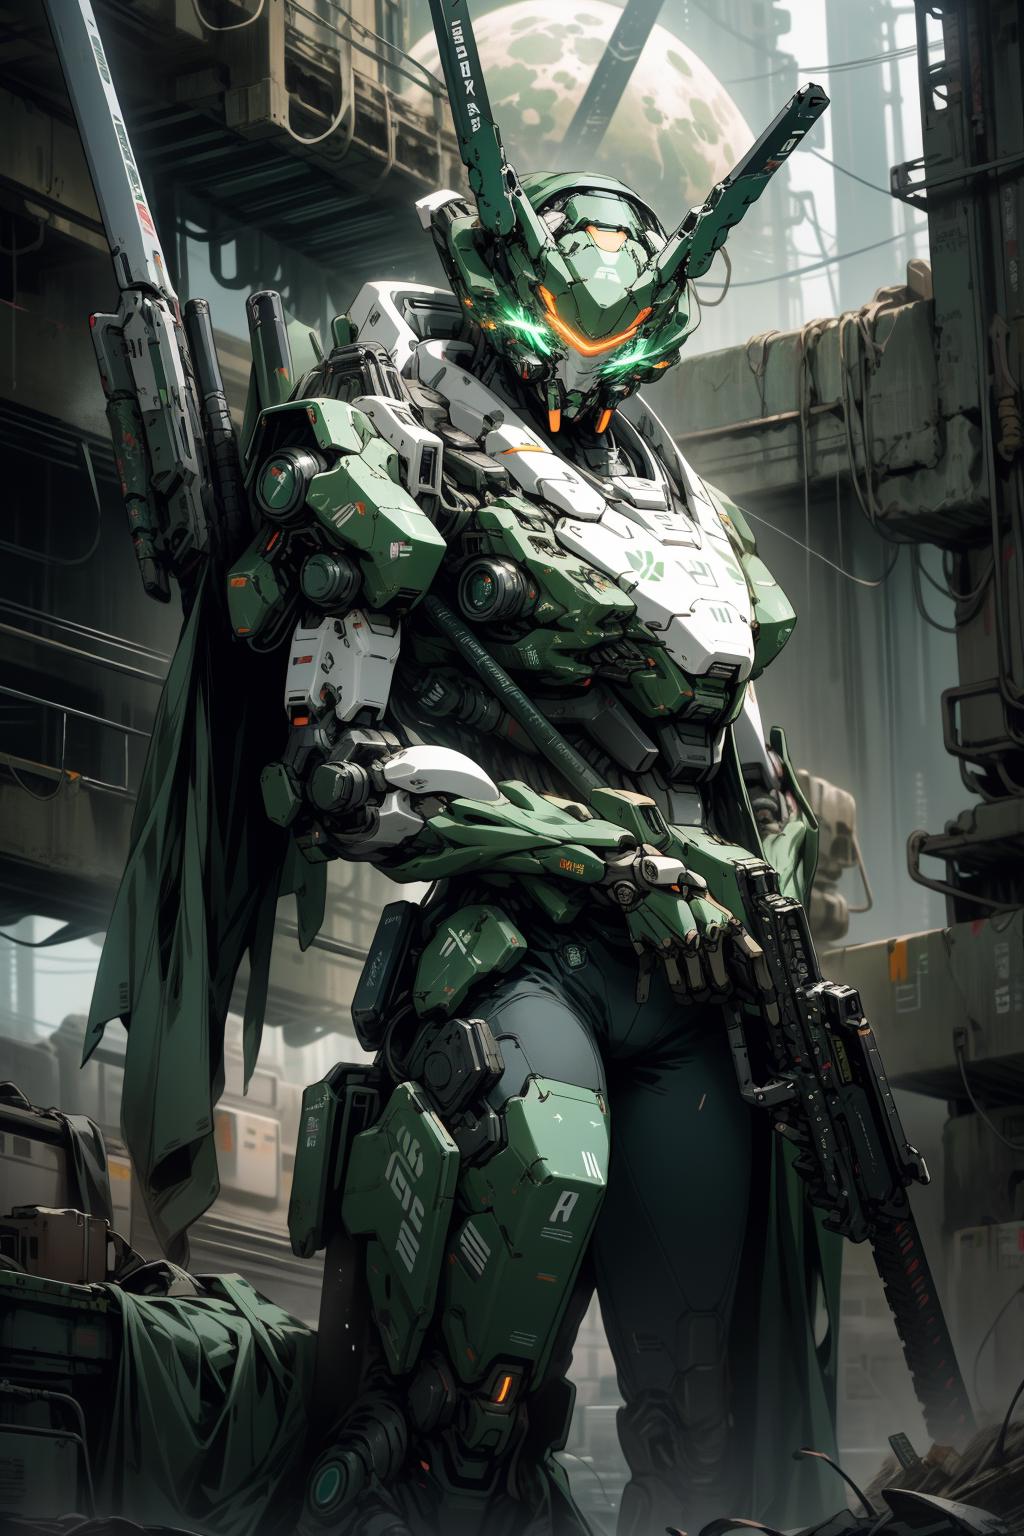 A robot with a green cape and guns on its back standing in a factory.